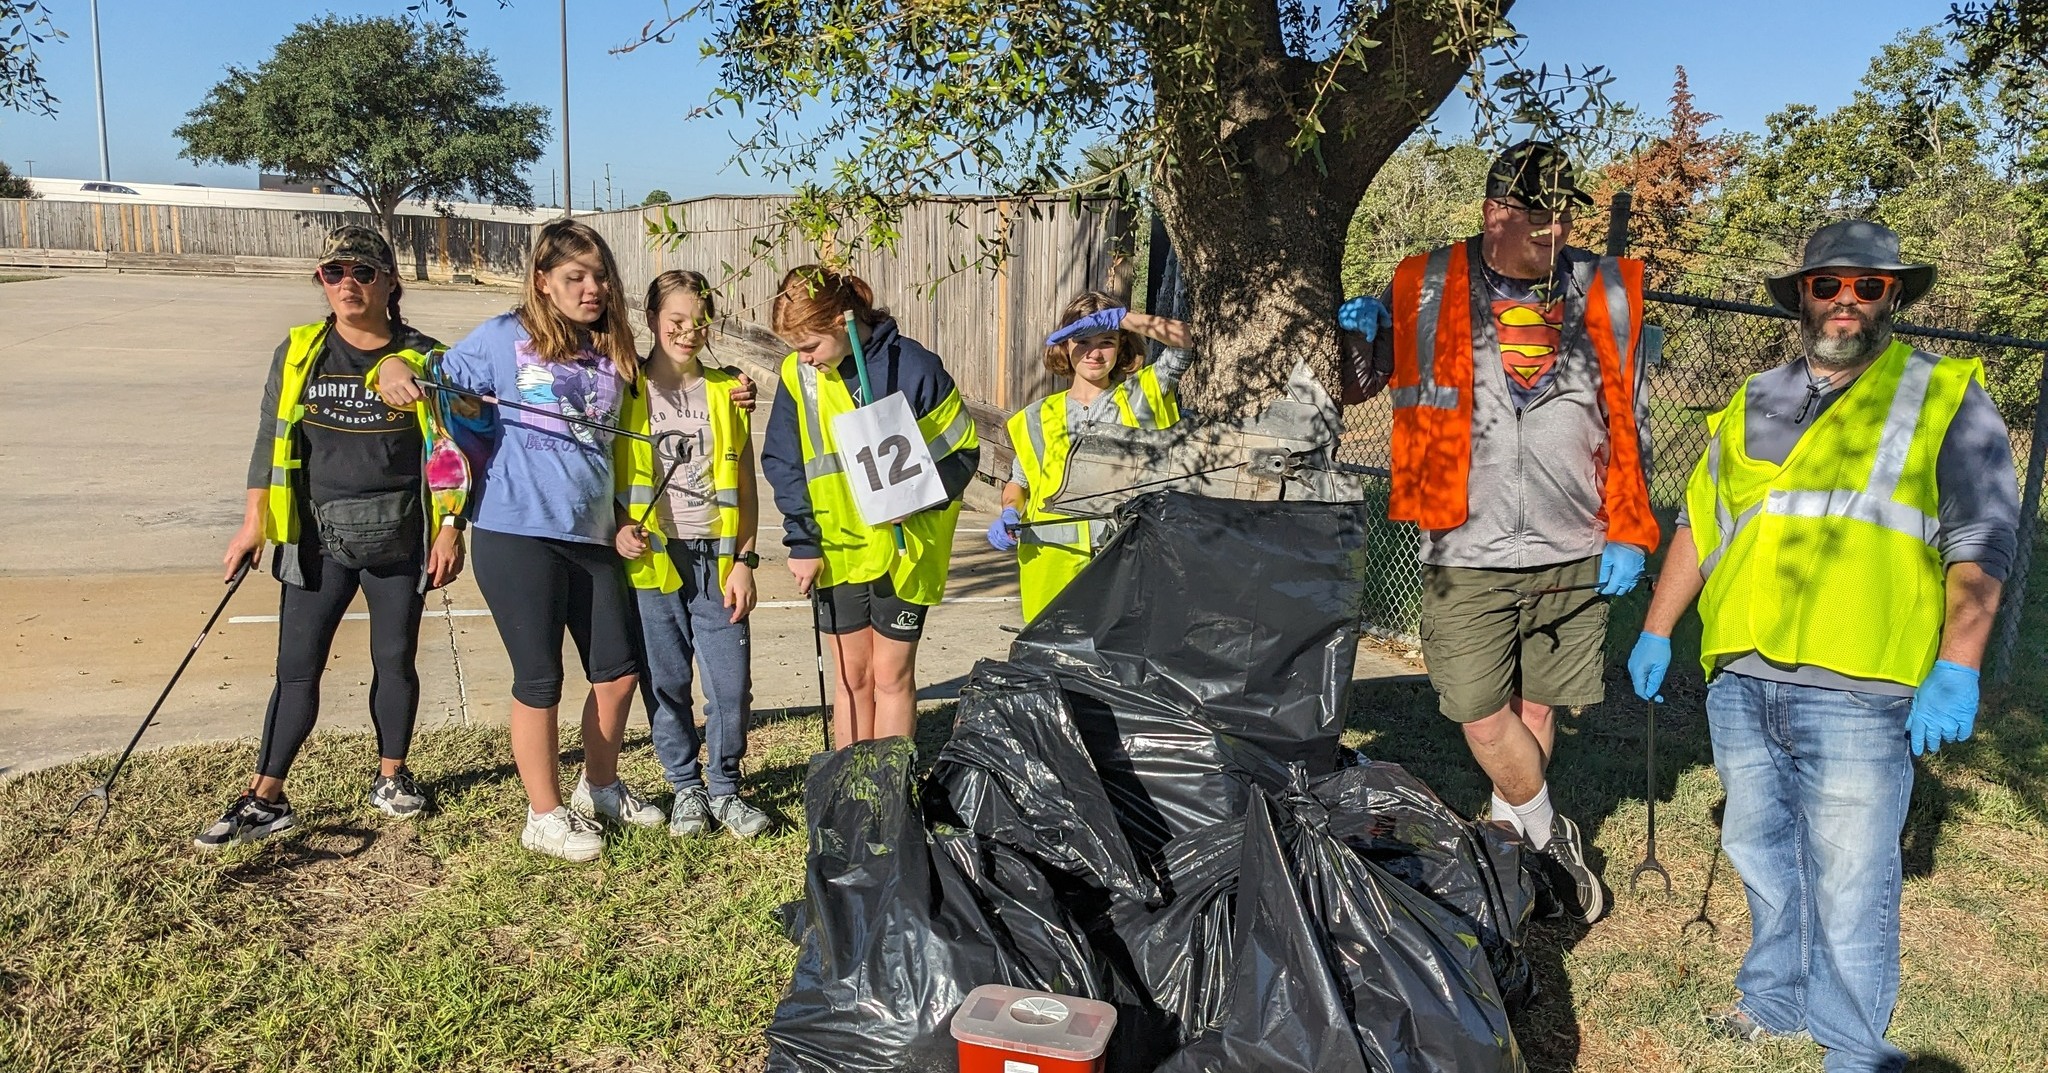 First Annual Tidy Up Tomball Event Draws Local Girl Scouts, TEAM